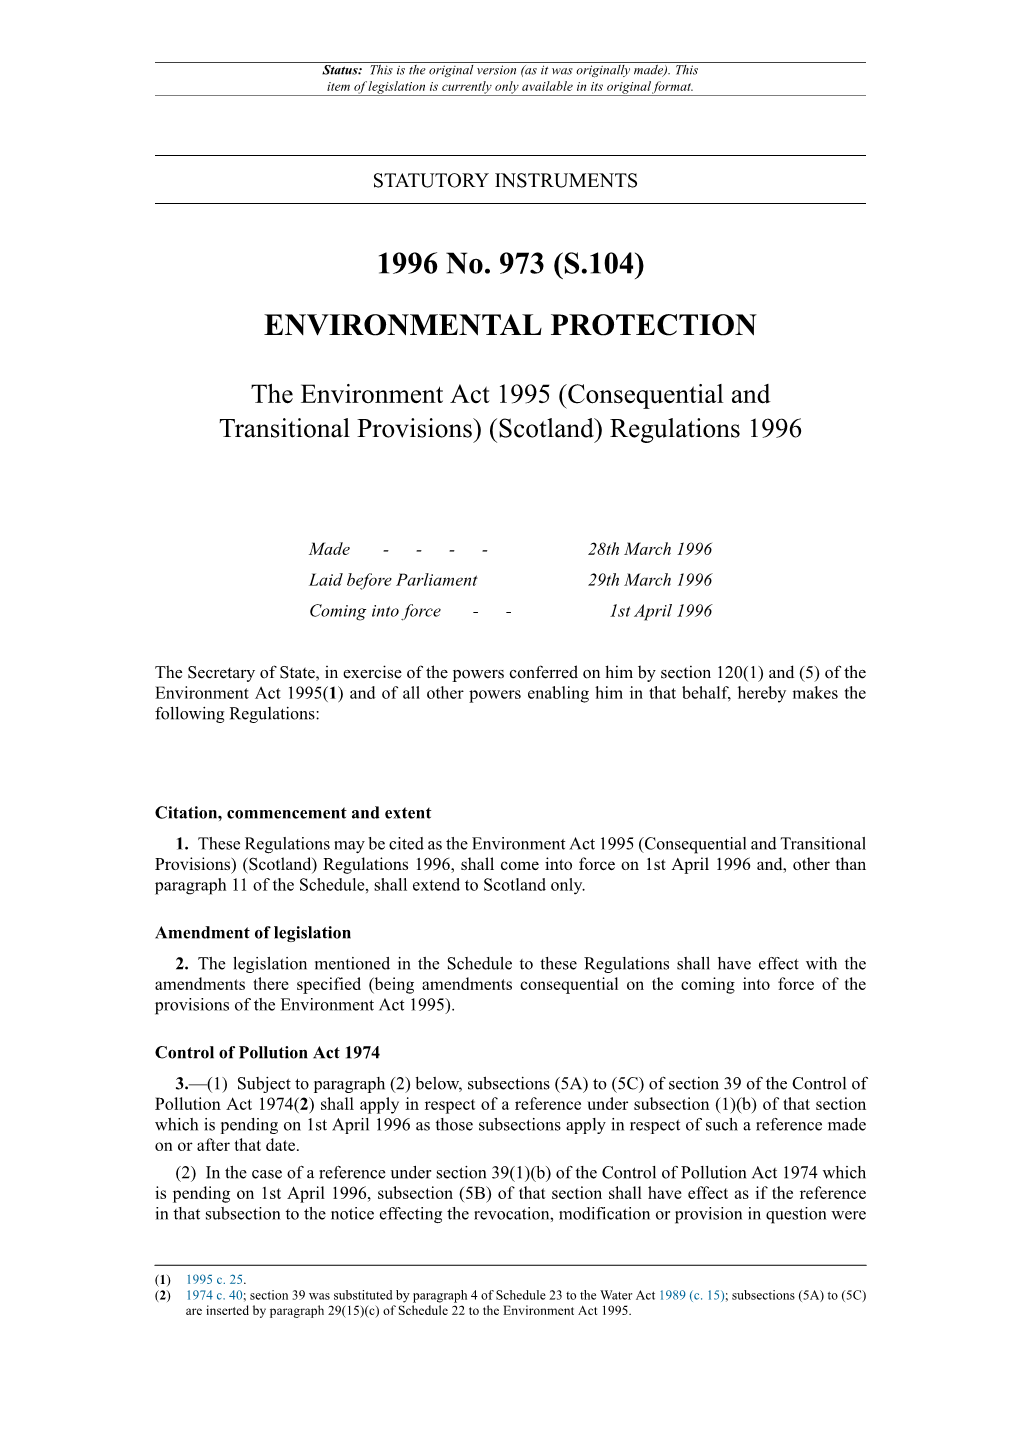 (Consequential and Transitional Provisions) (Scotland) Regulations 1996